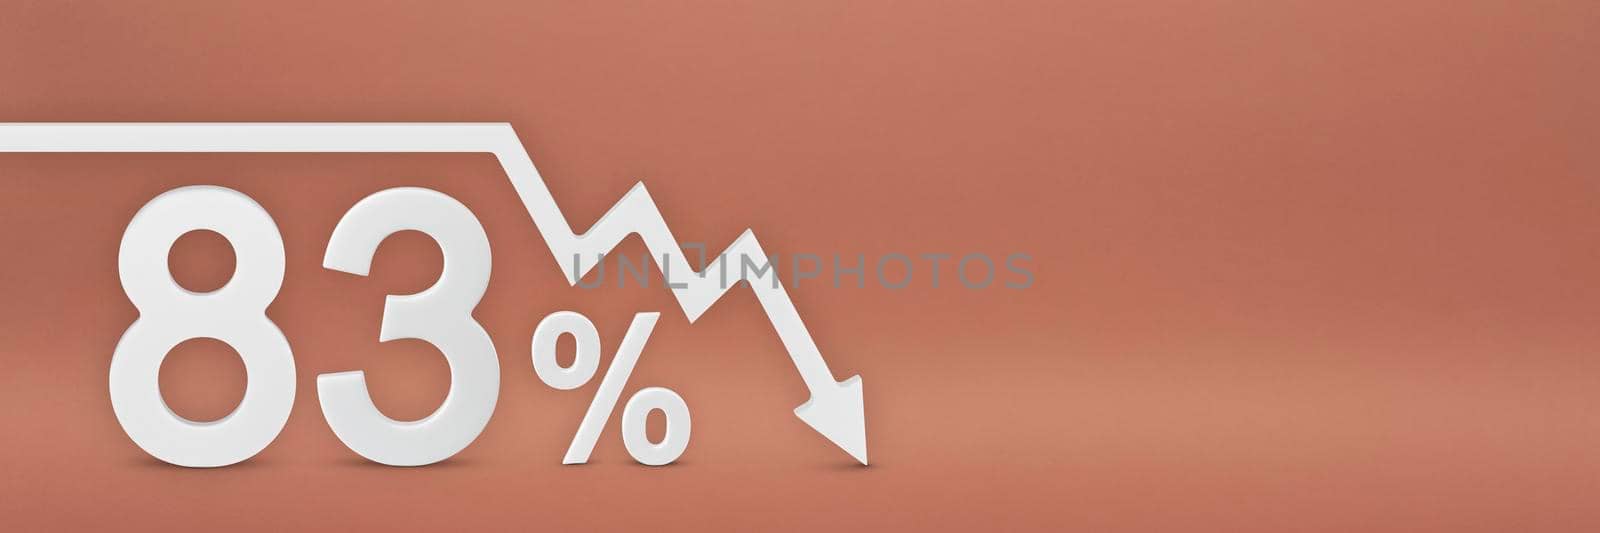 eighty-three percent, the arrow on the graph is pointing down. Stock market crash, bear market, inflation.Economic collapse, collapse of stocks.3d banner,83 percent discount sign on a red background. by SERSOL